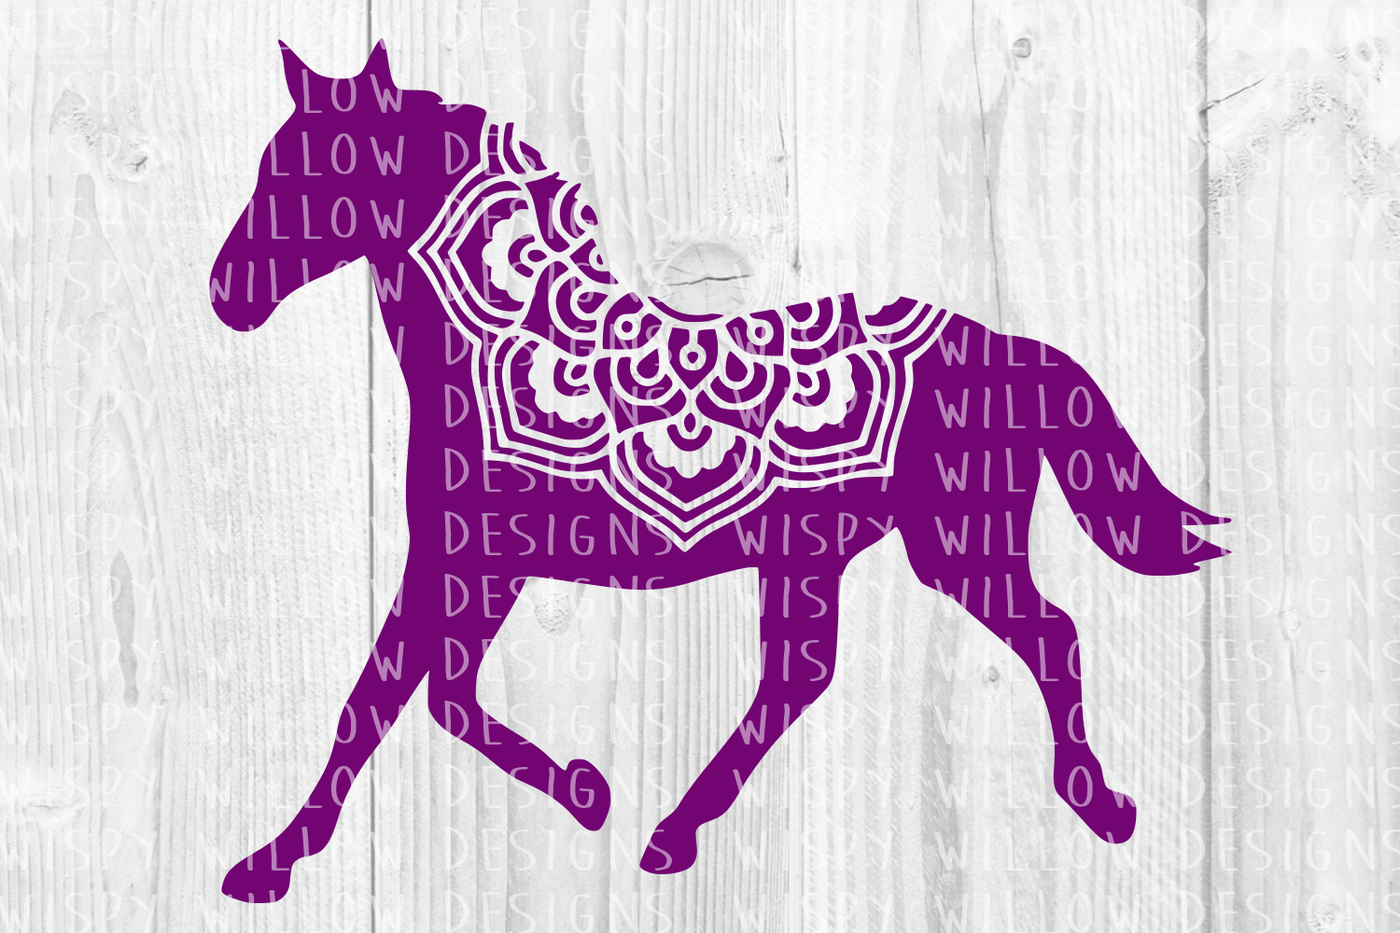 Download Horse Mandala SVG/DXF/EPS/PNG/JPG/PDF By Wispy Willow ...